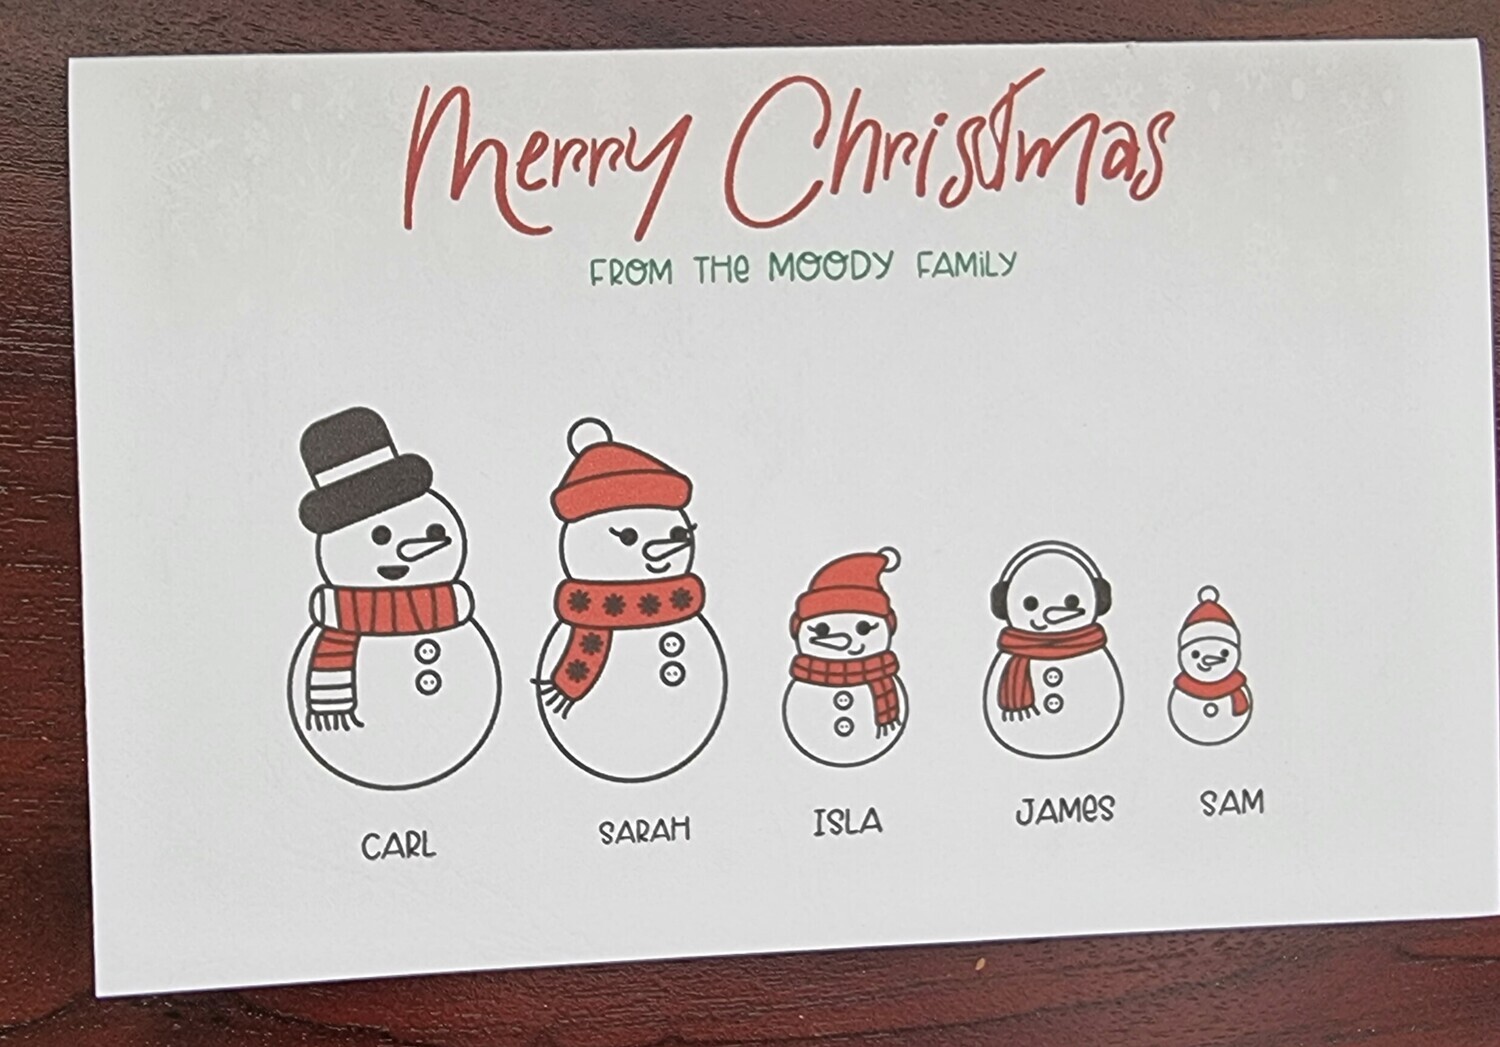 Snow family personalized Christmas card